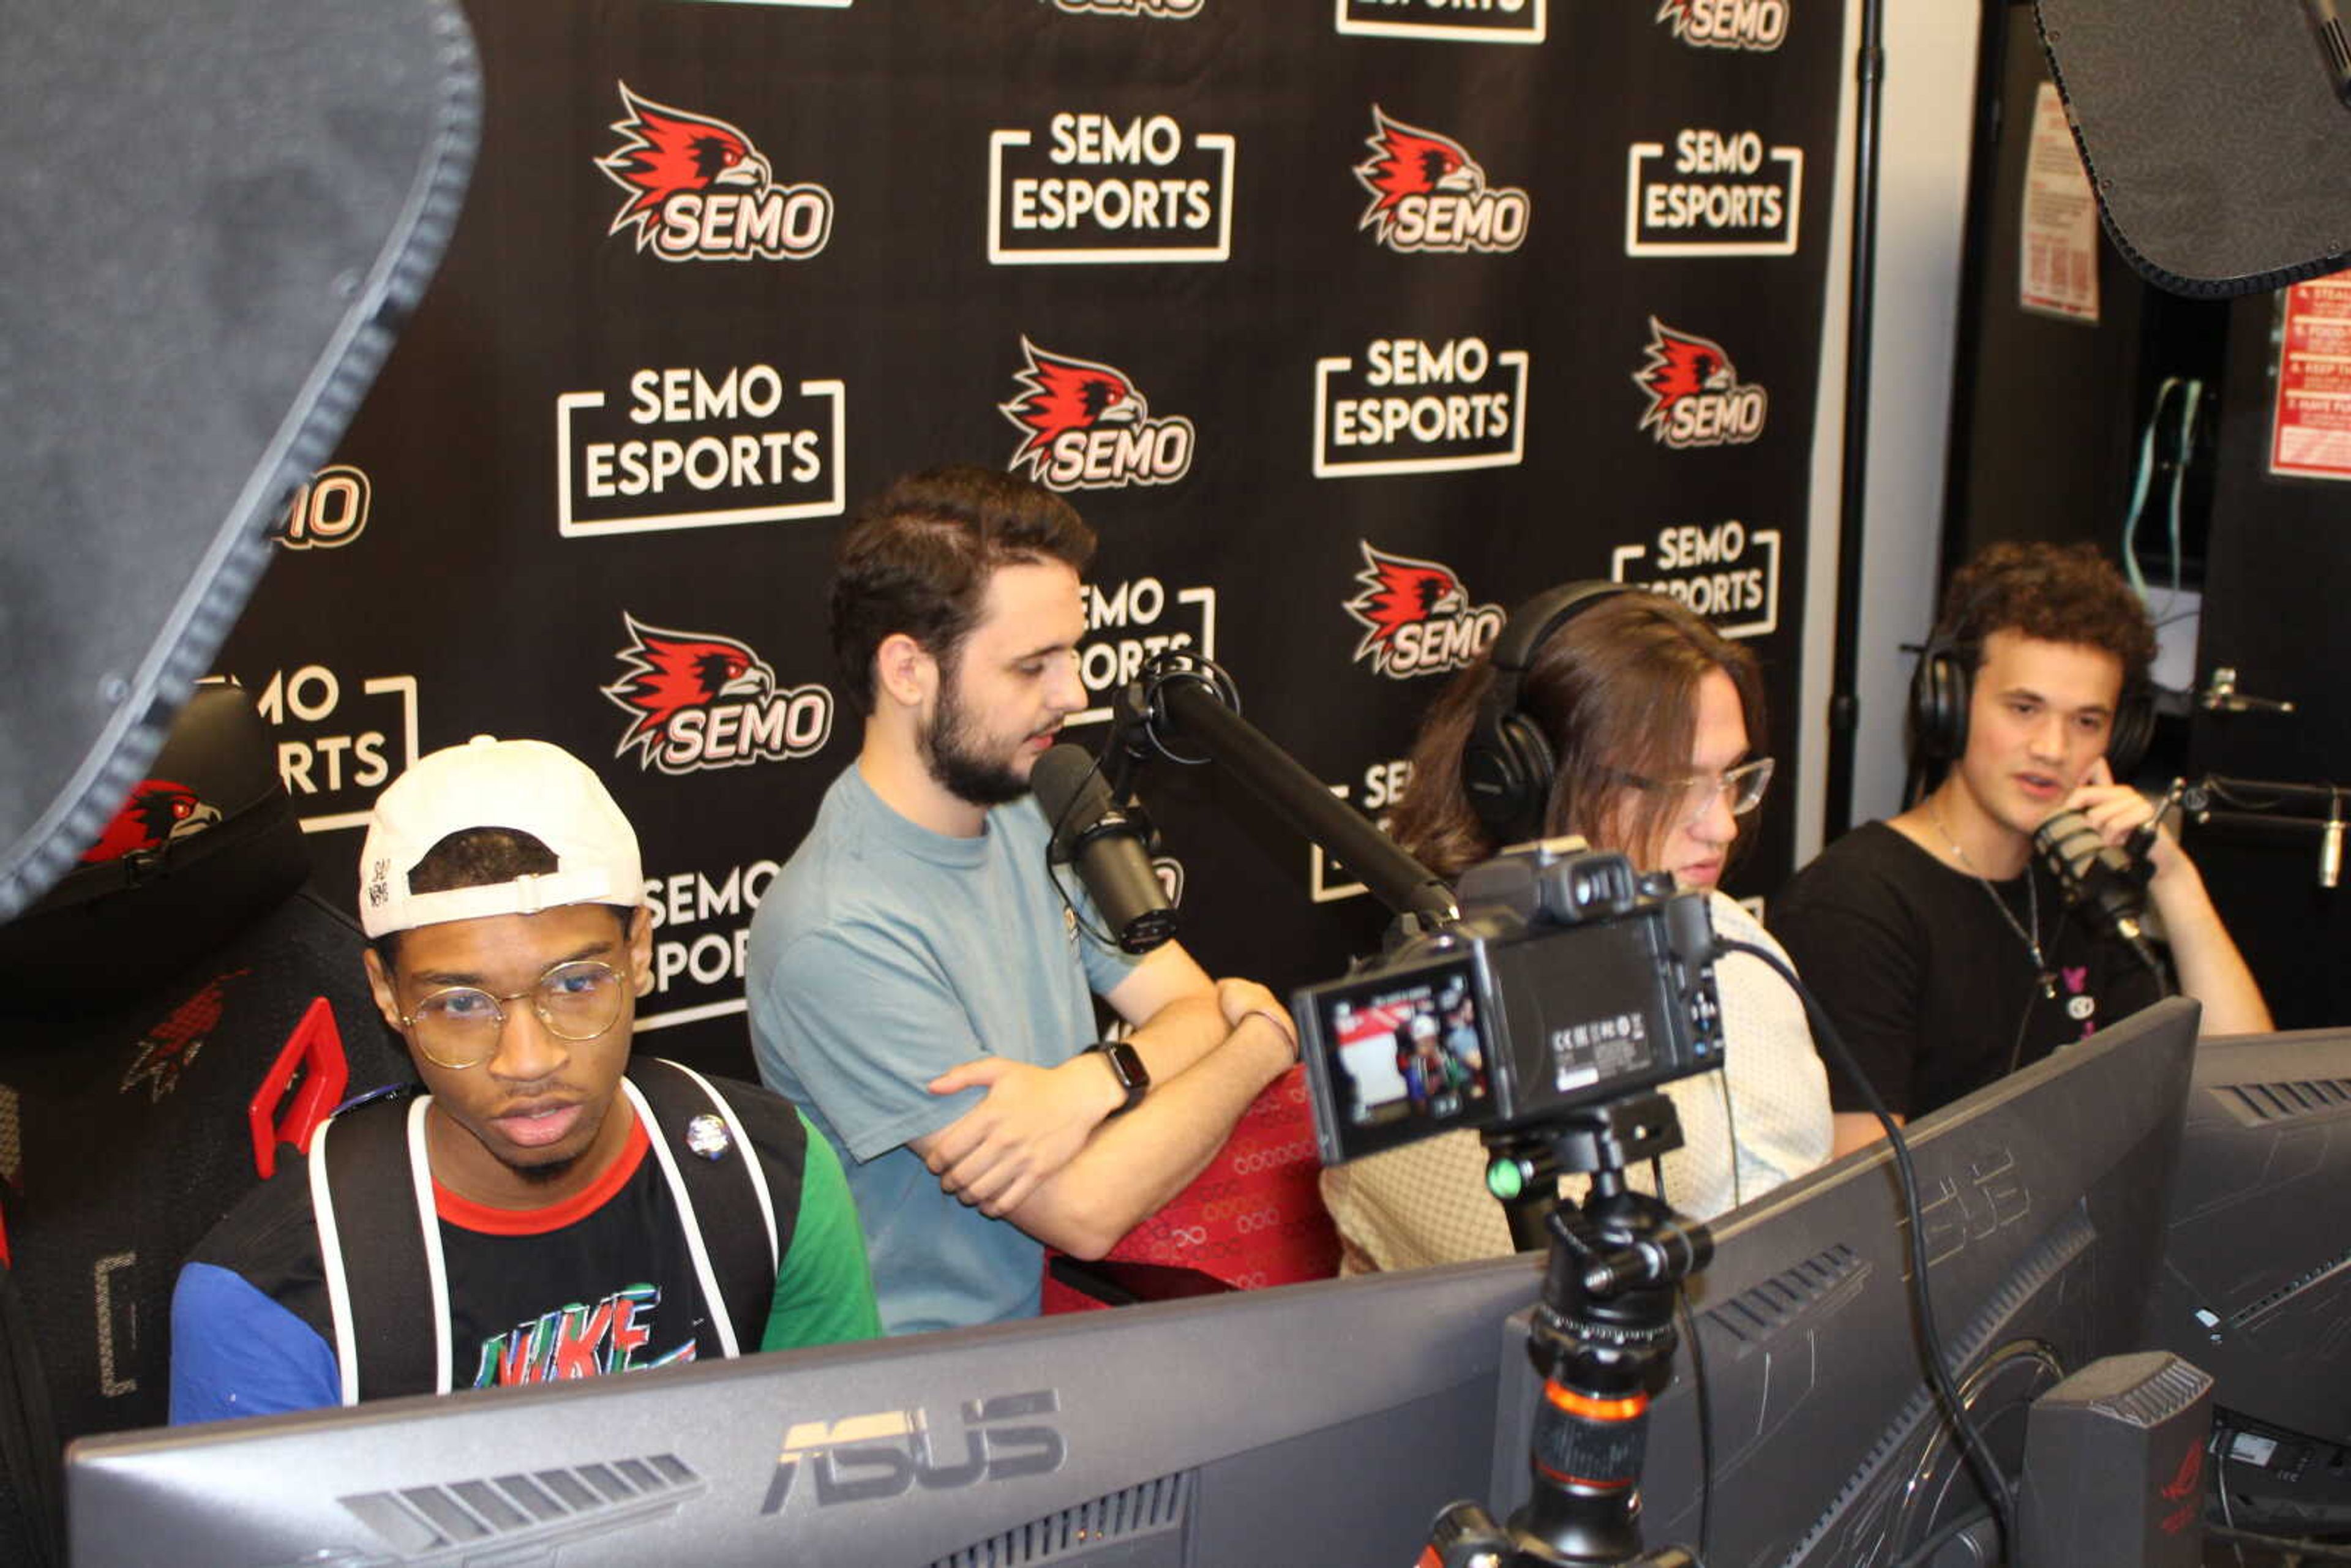 (Left) Jalik Smith, Zach Healy, Jack Stout and TJ Rysanek hosting the 24 hour charity stream. The stream had been going on for 6 hours at the time.